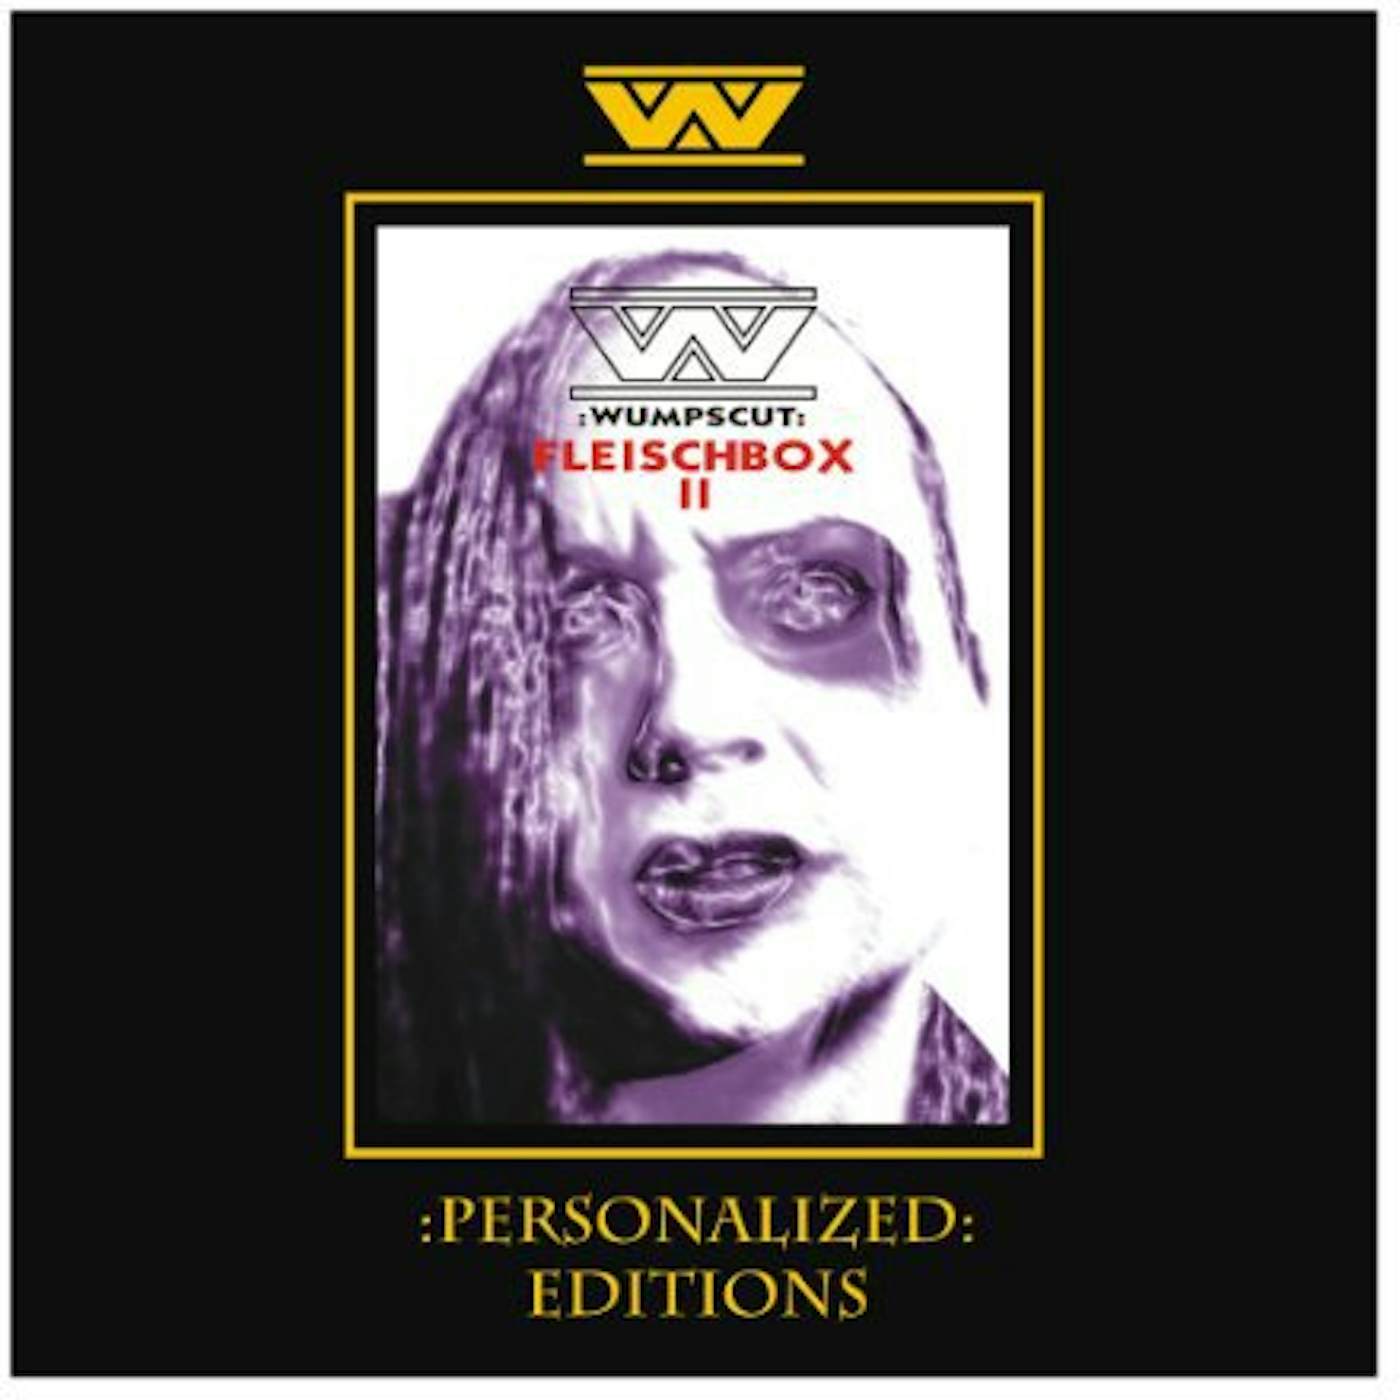 :Wumpscut: BOESES JUNGES FLEISCH II PERSONALIZED EDITIONS (14 Vinyl Record